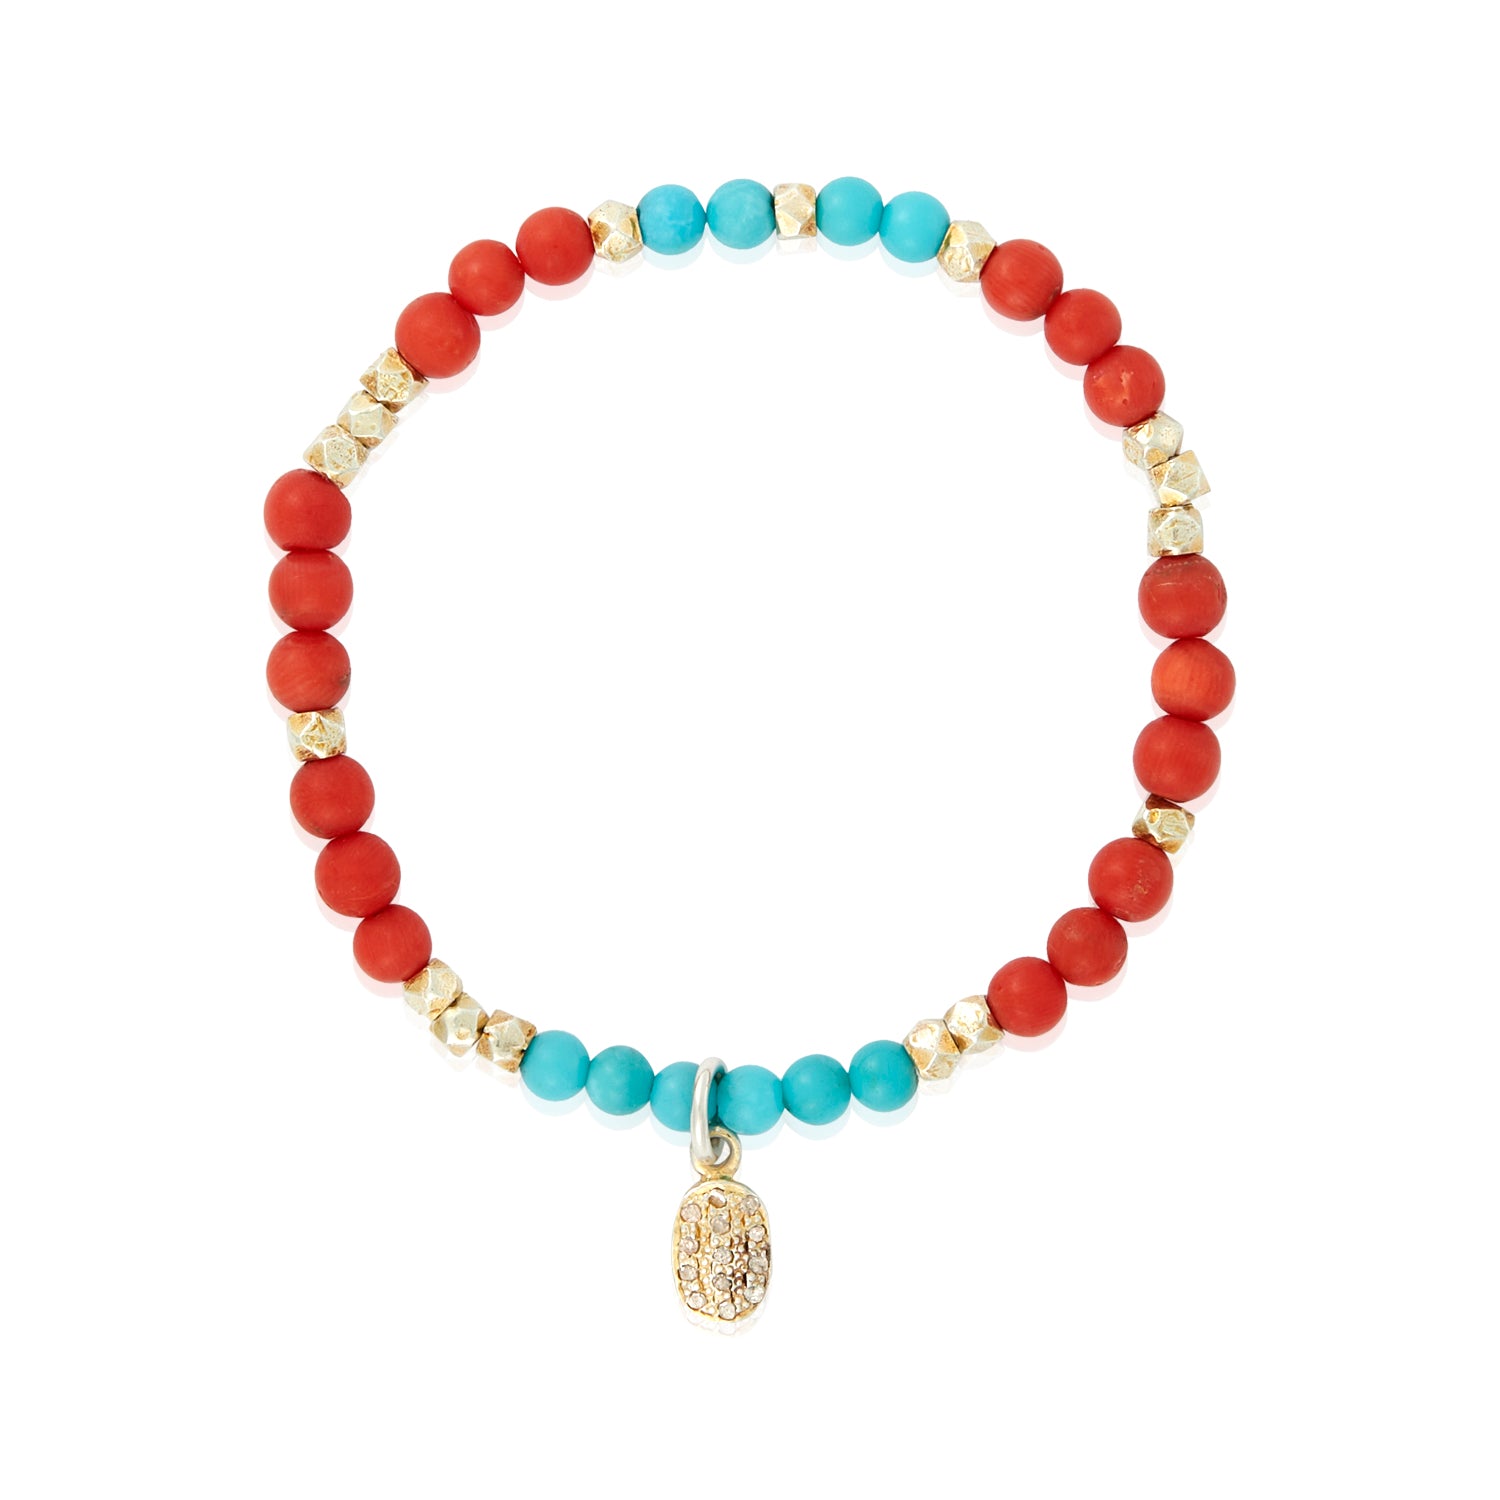 Coral Turquoise Stretchy Bracelet